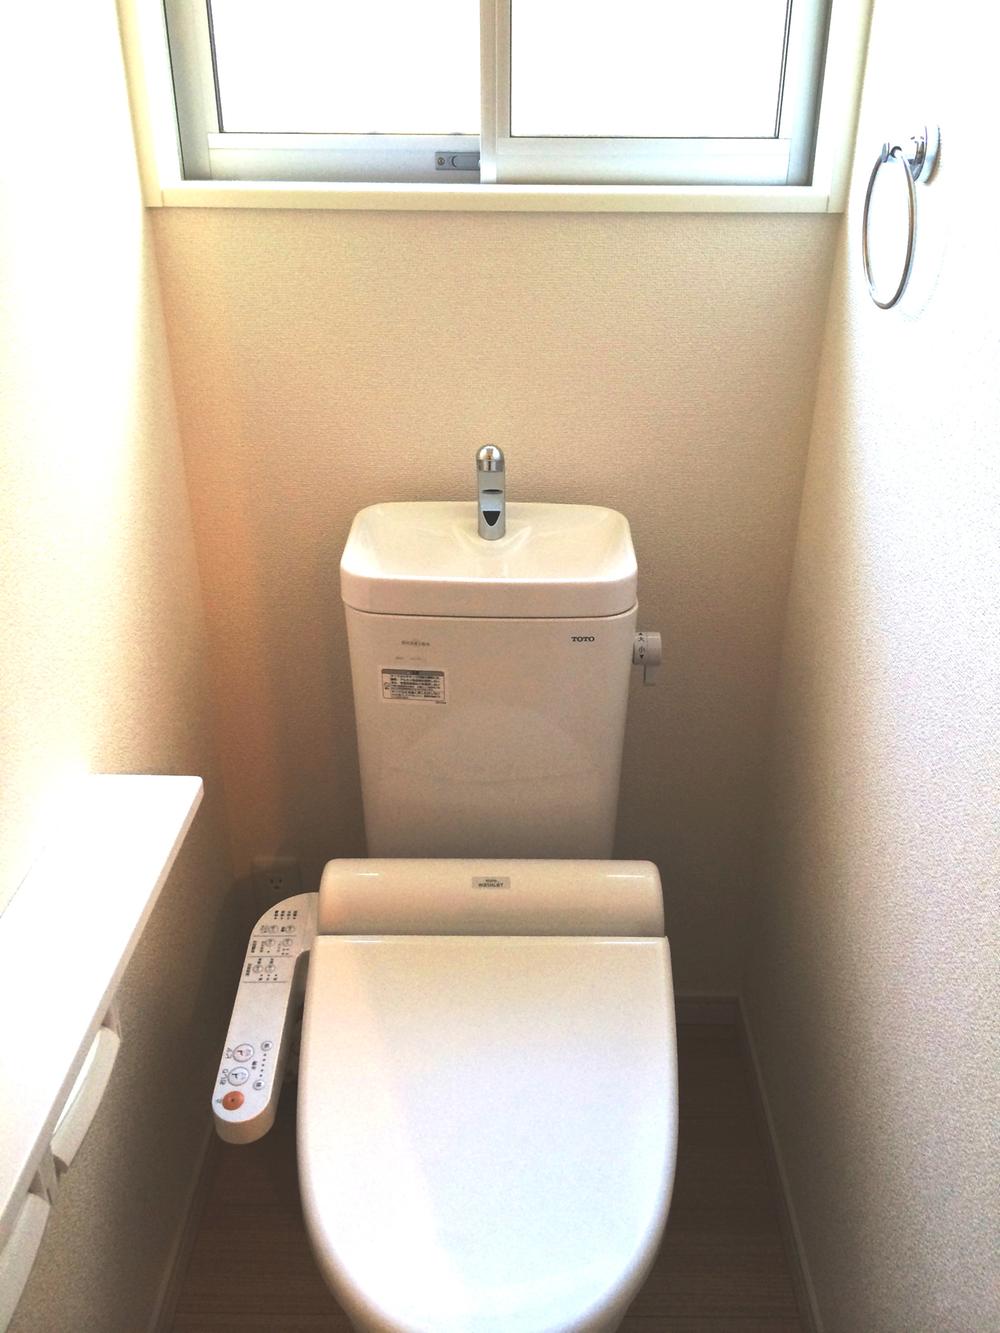 Toilet.  [1 Building] Equipped with a water-saving toilet. (November 2013) Shooting